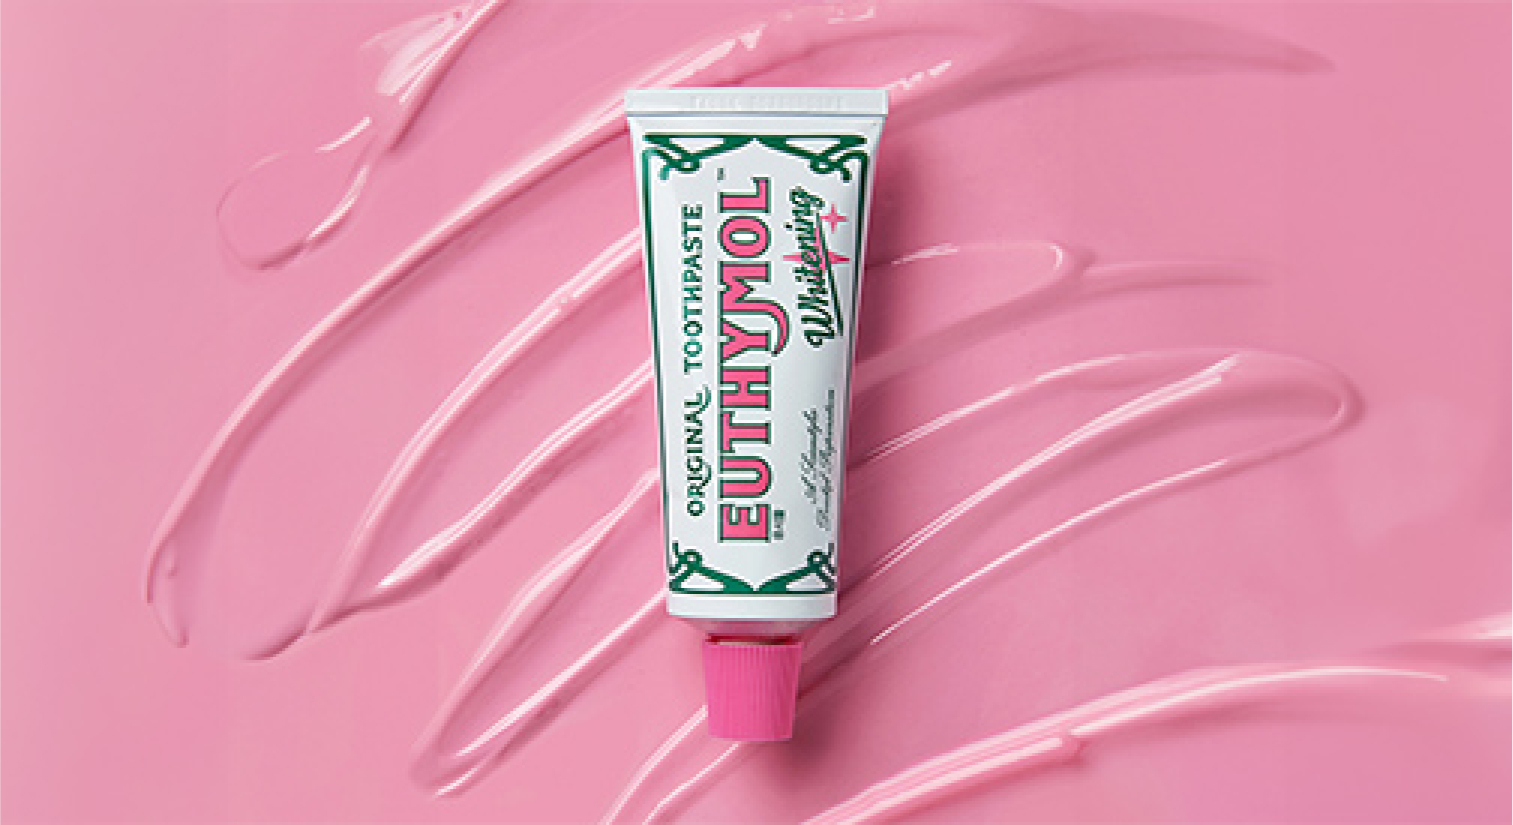 Pink intensity derived from eucalyptus and thymol oil, British luxury oral care brand